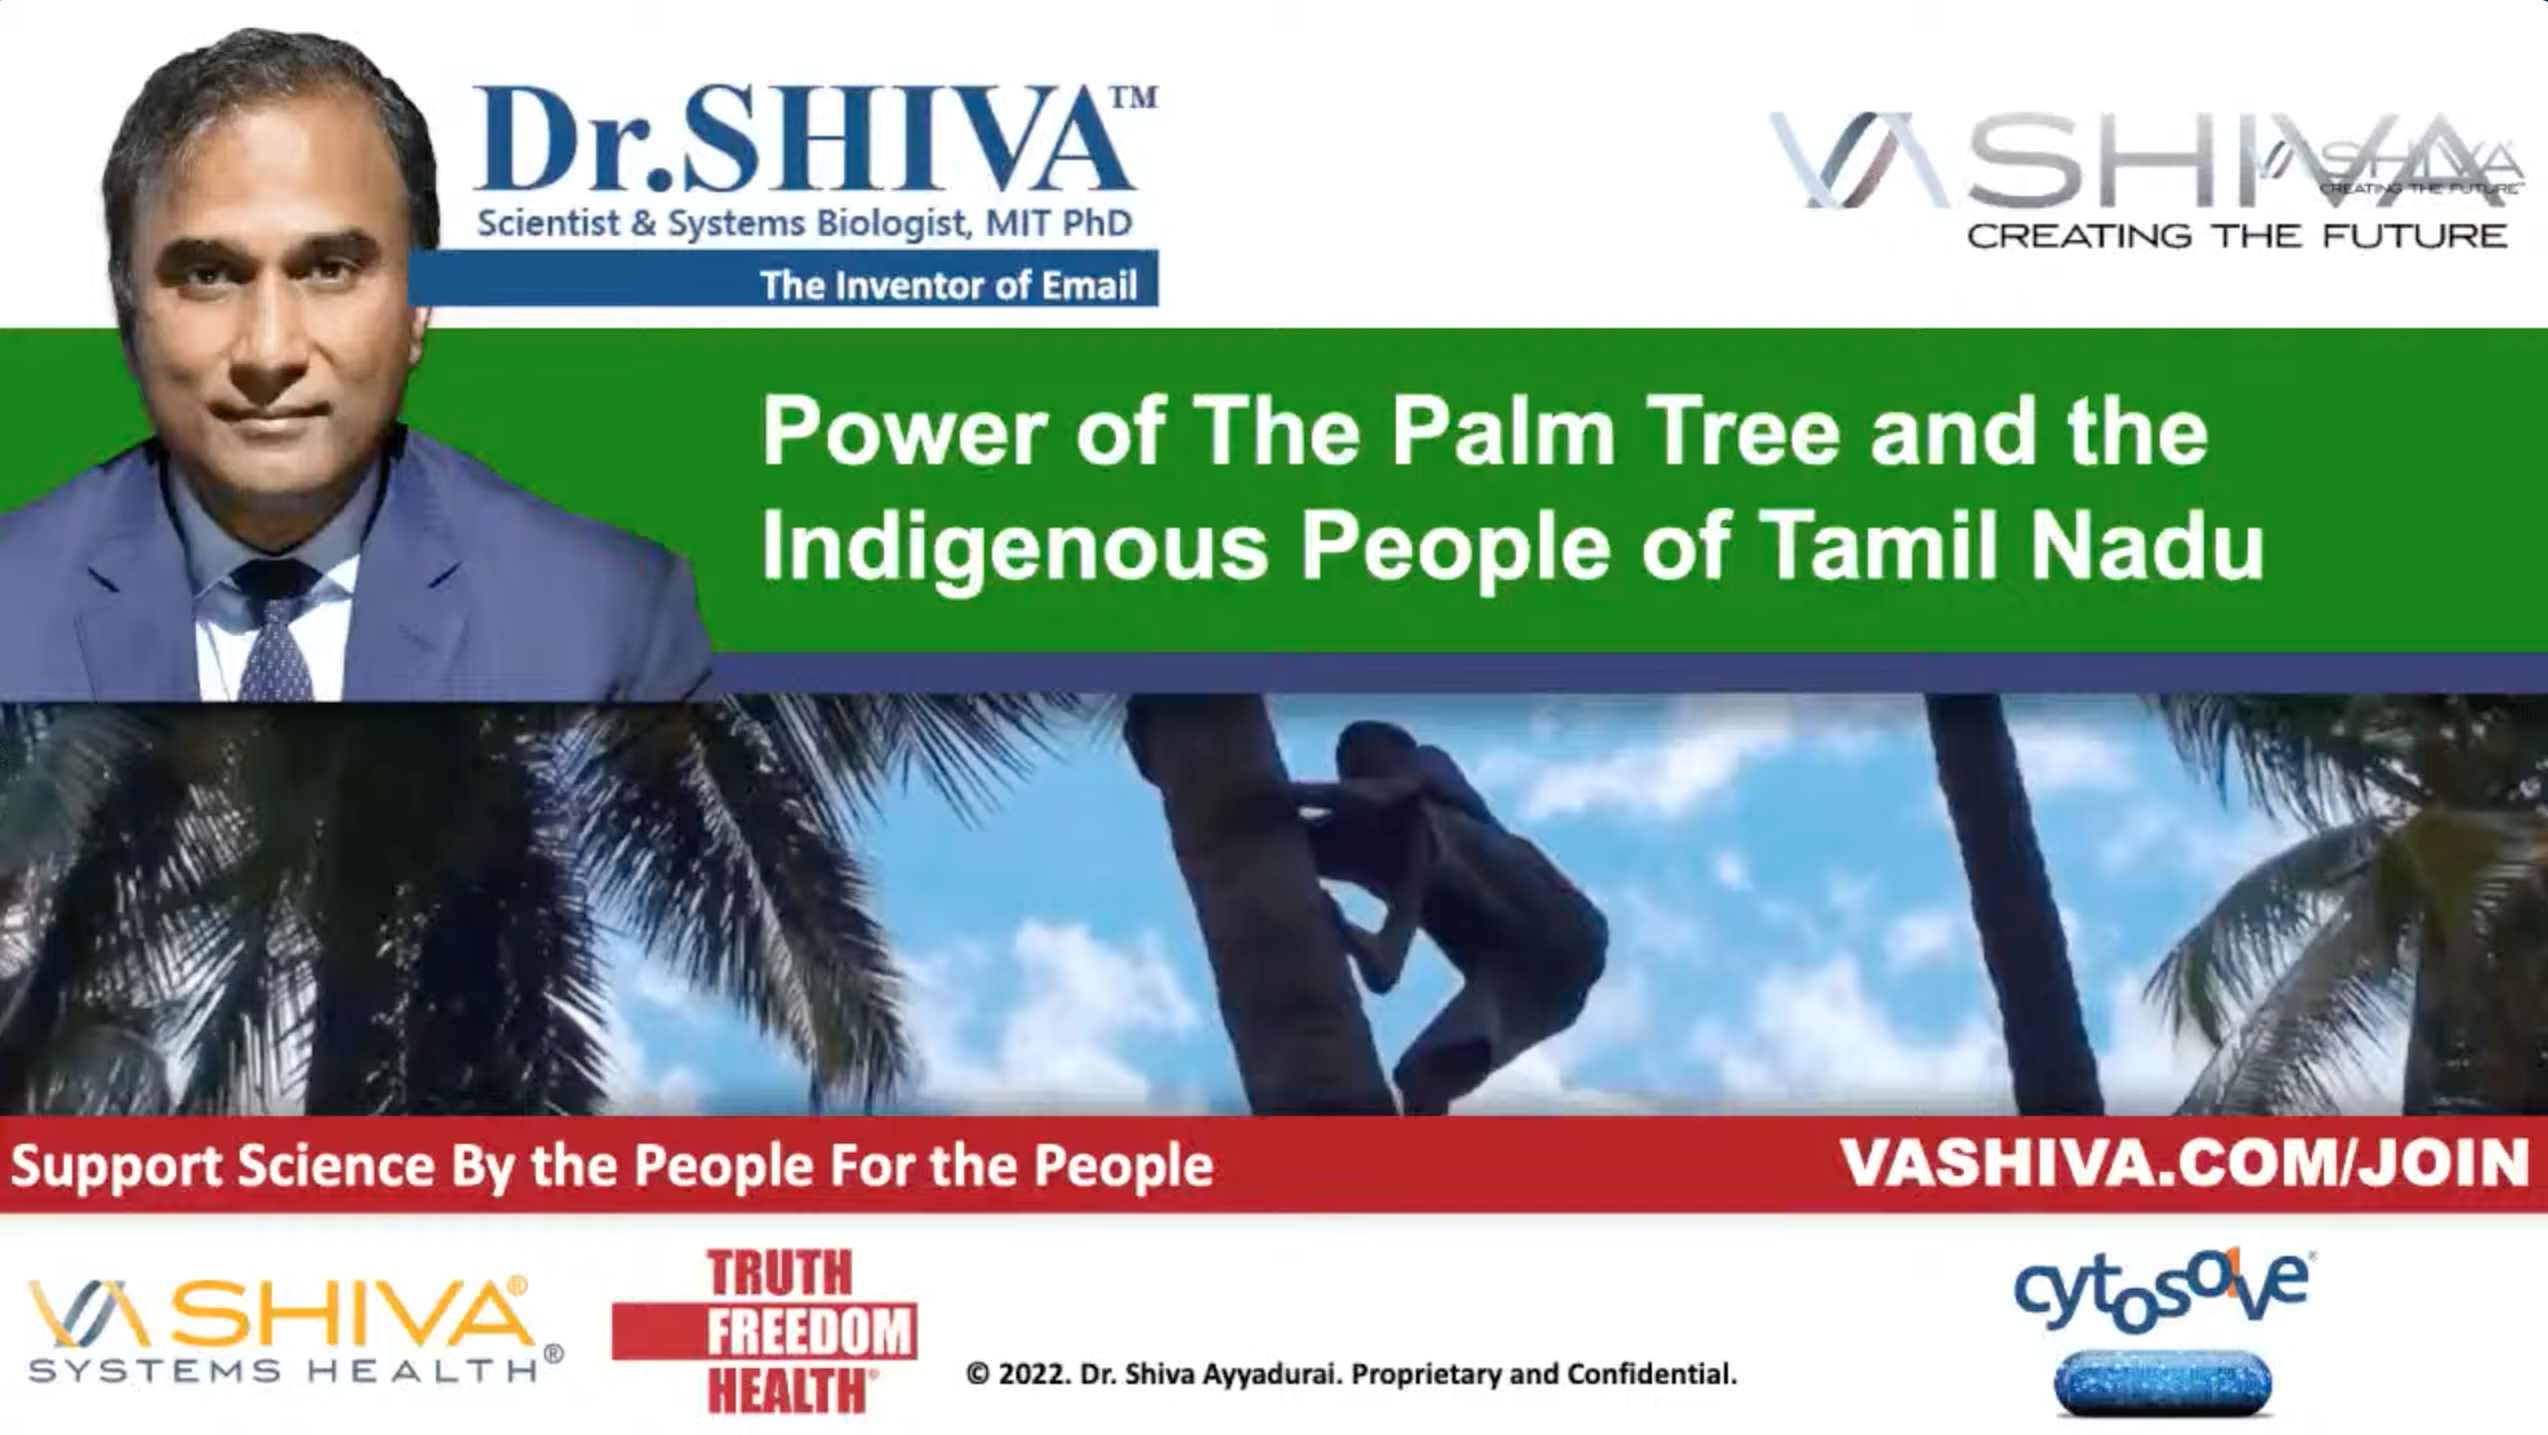 Dr.SHIVA LIVE: Power of the Palm Tree & The Indigenous People of Tamil Nadu